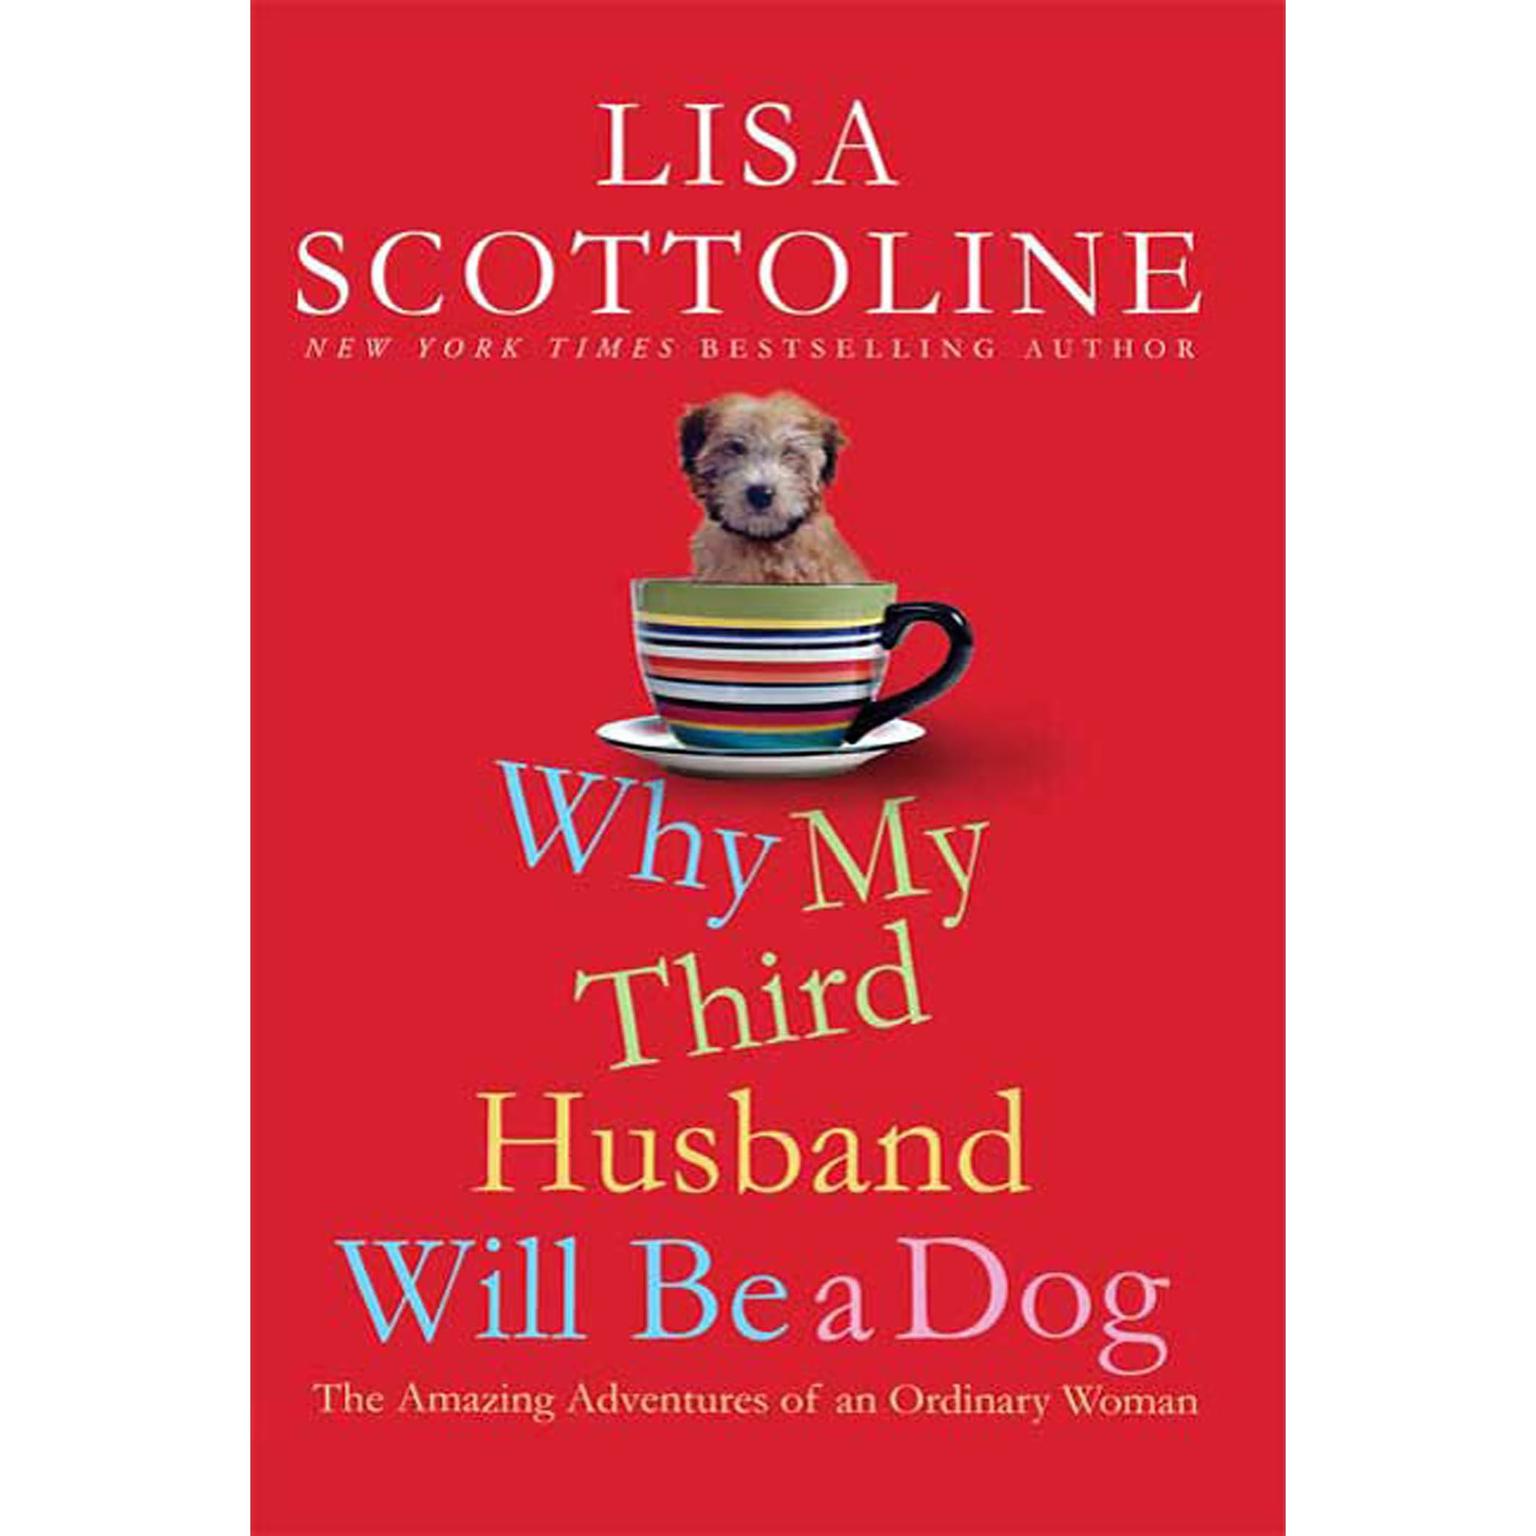 Why My Third Husband Will Be a Dog: The Amazing Adventures of an Ordinary Woman Audiobook, by Lisa Scottoline